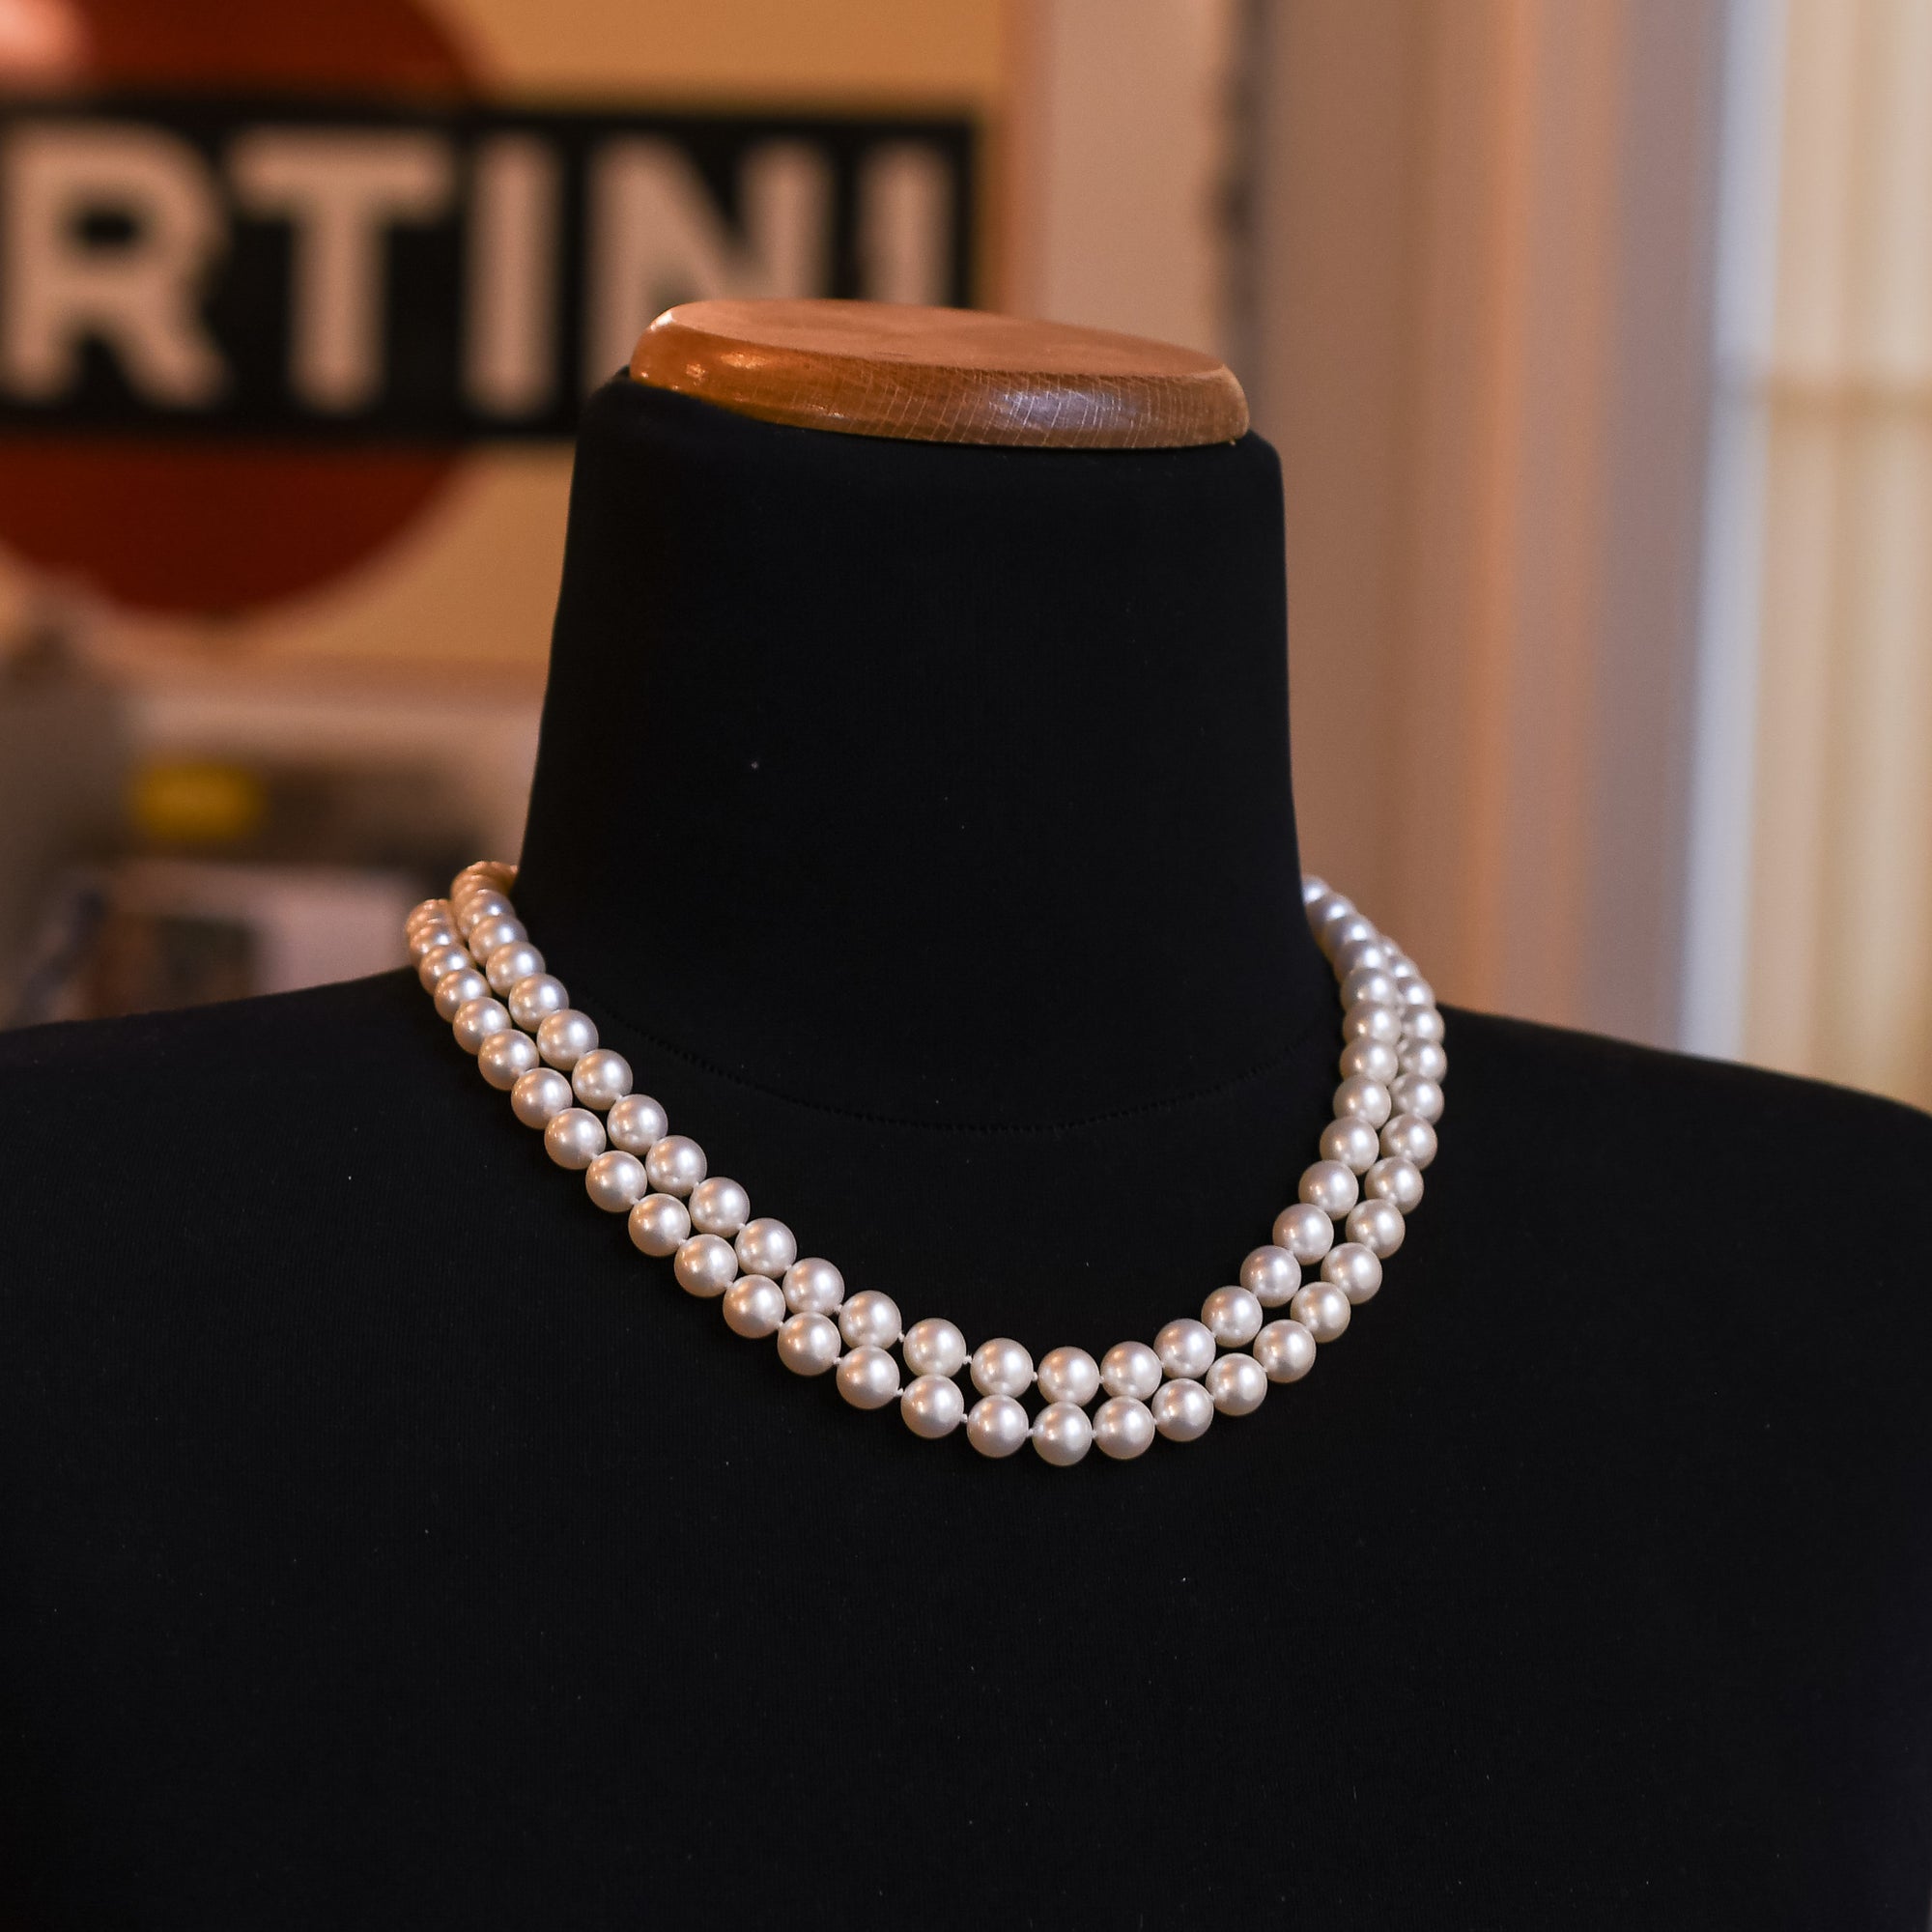 Vintage Double Strand Pearl Necklace with Diamond Clasp – Butter